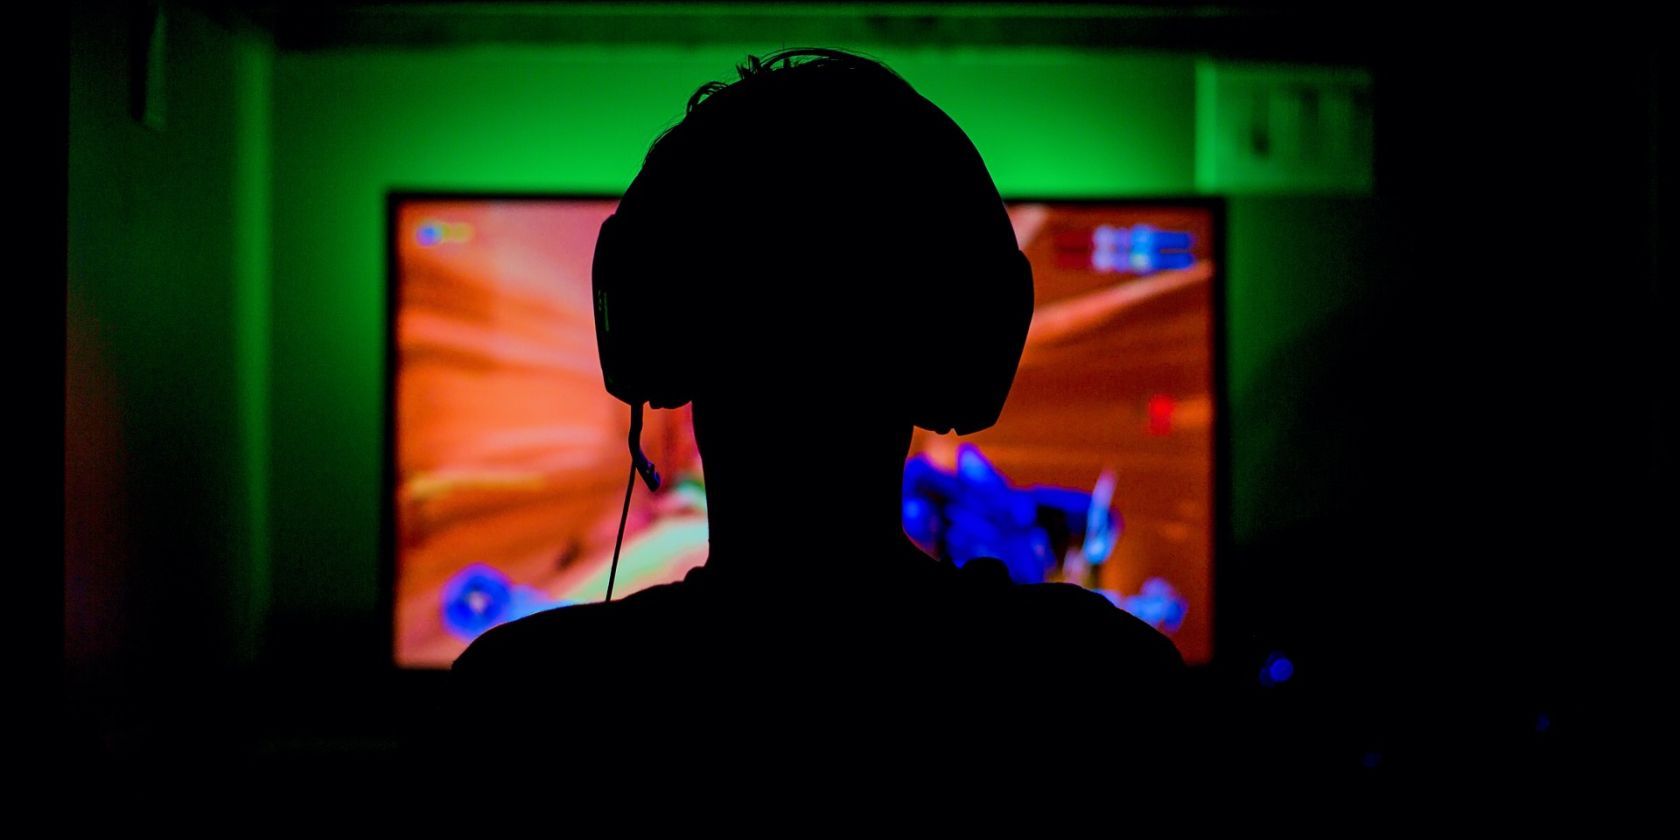 Man with headphones on playing a video game